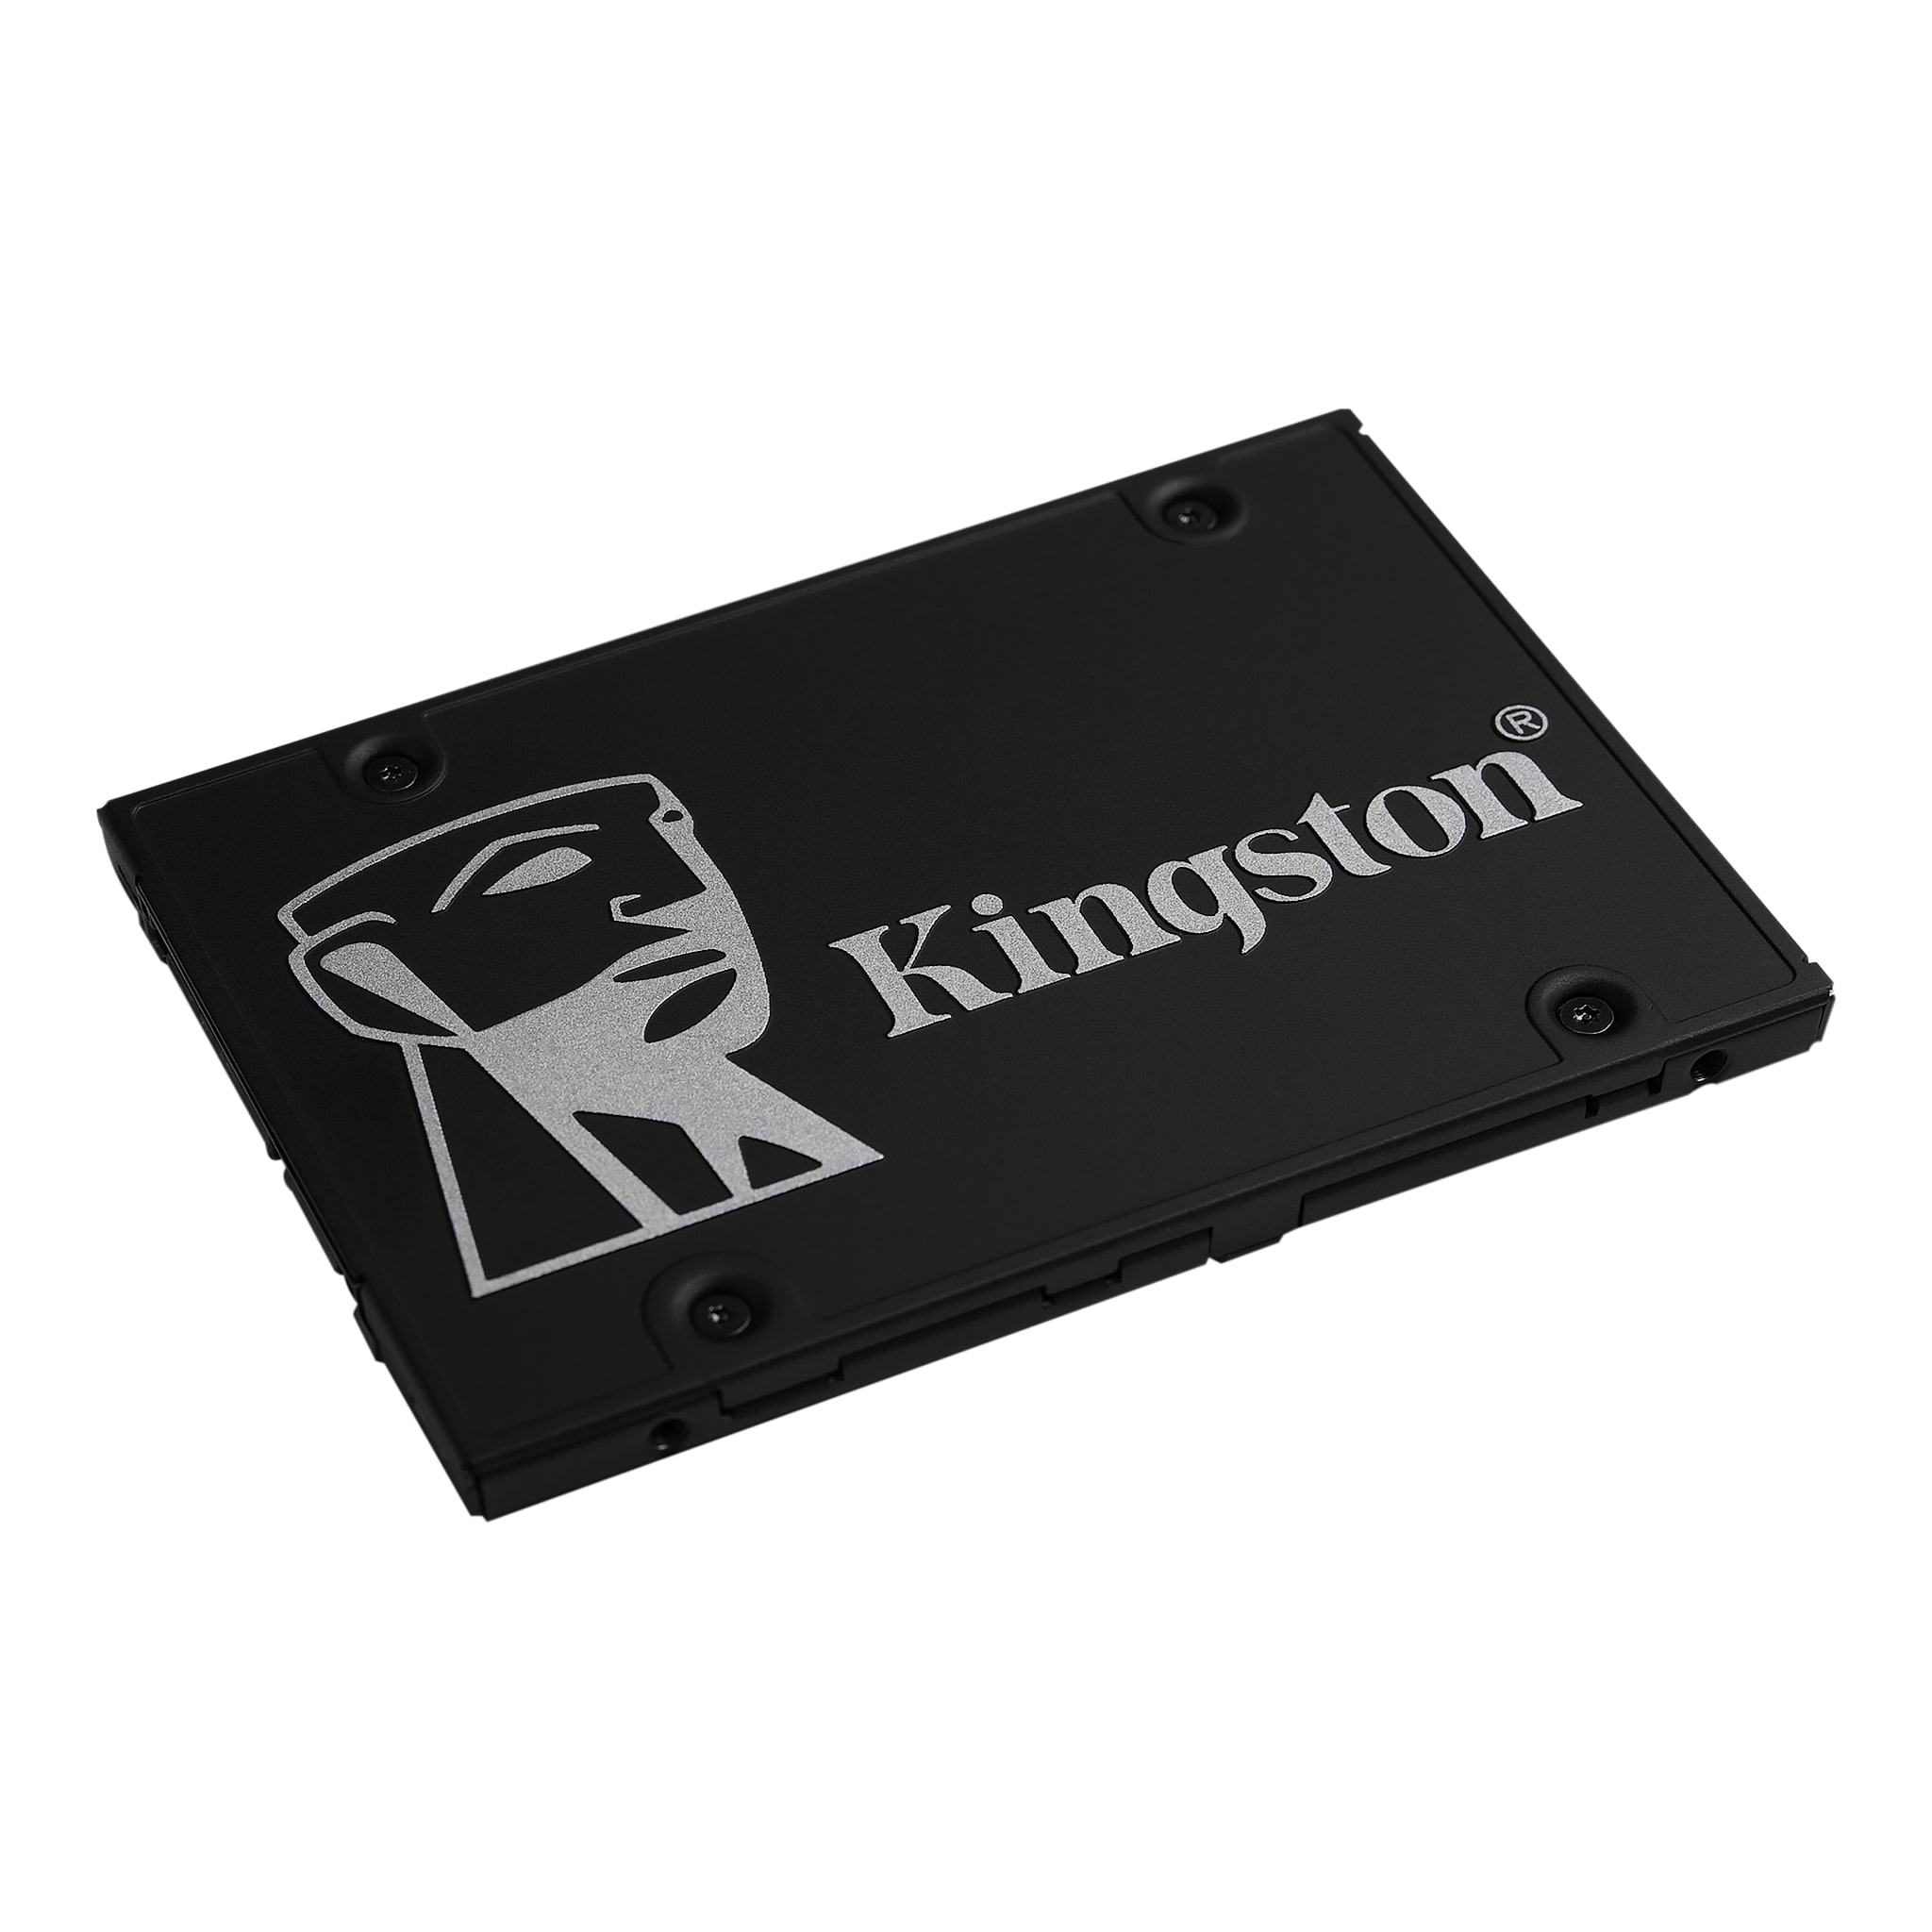 To deal with main land custom KC600 – Up to 2TB 2.5" and mSATA SSD with Hardware-based Self-encryption  and 3D TLC NAND - Kingston Technology